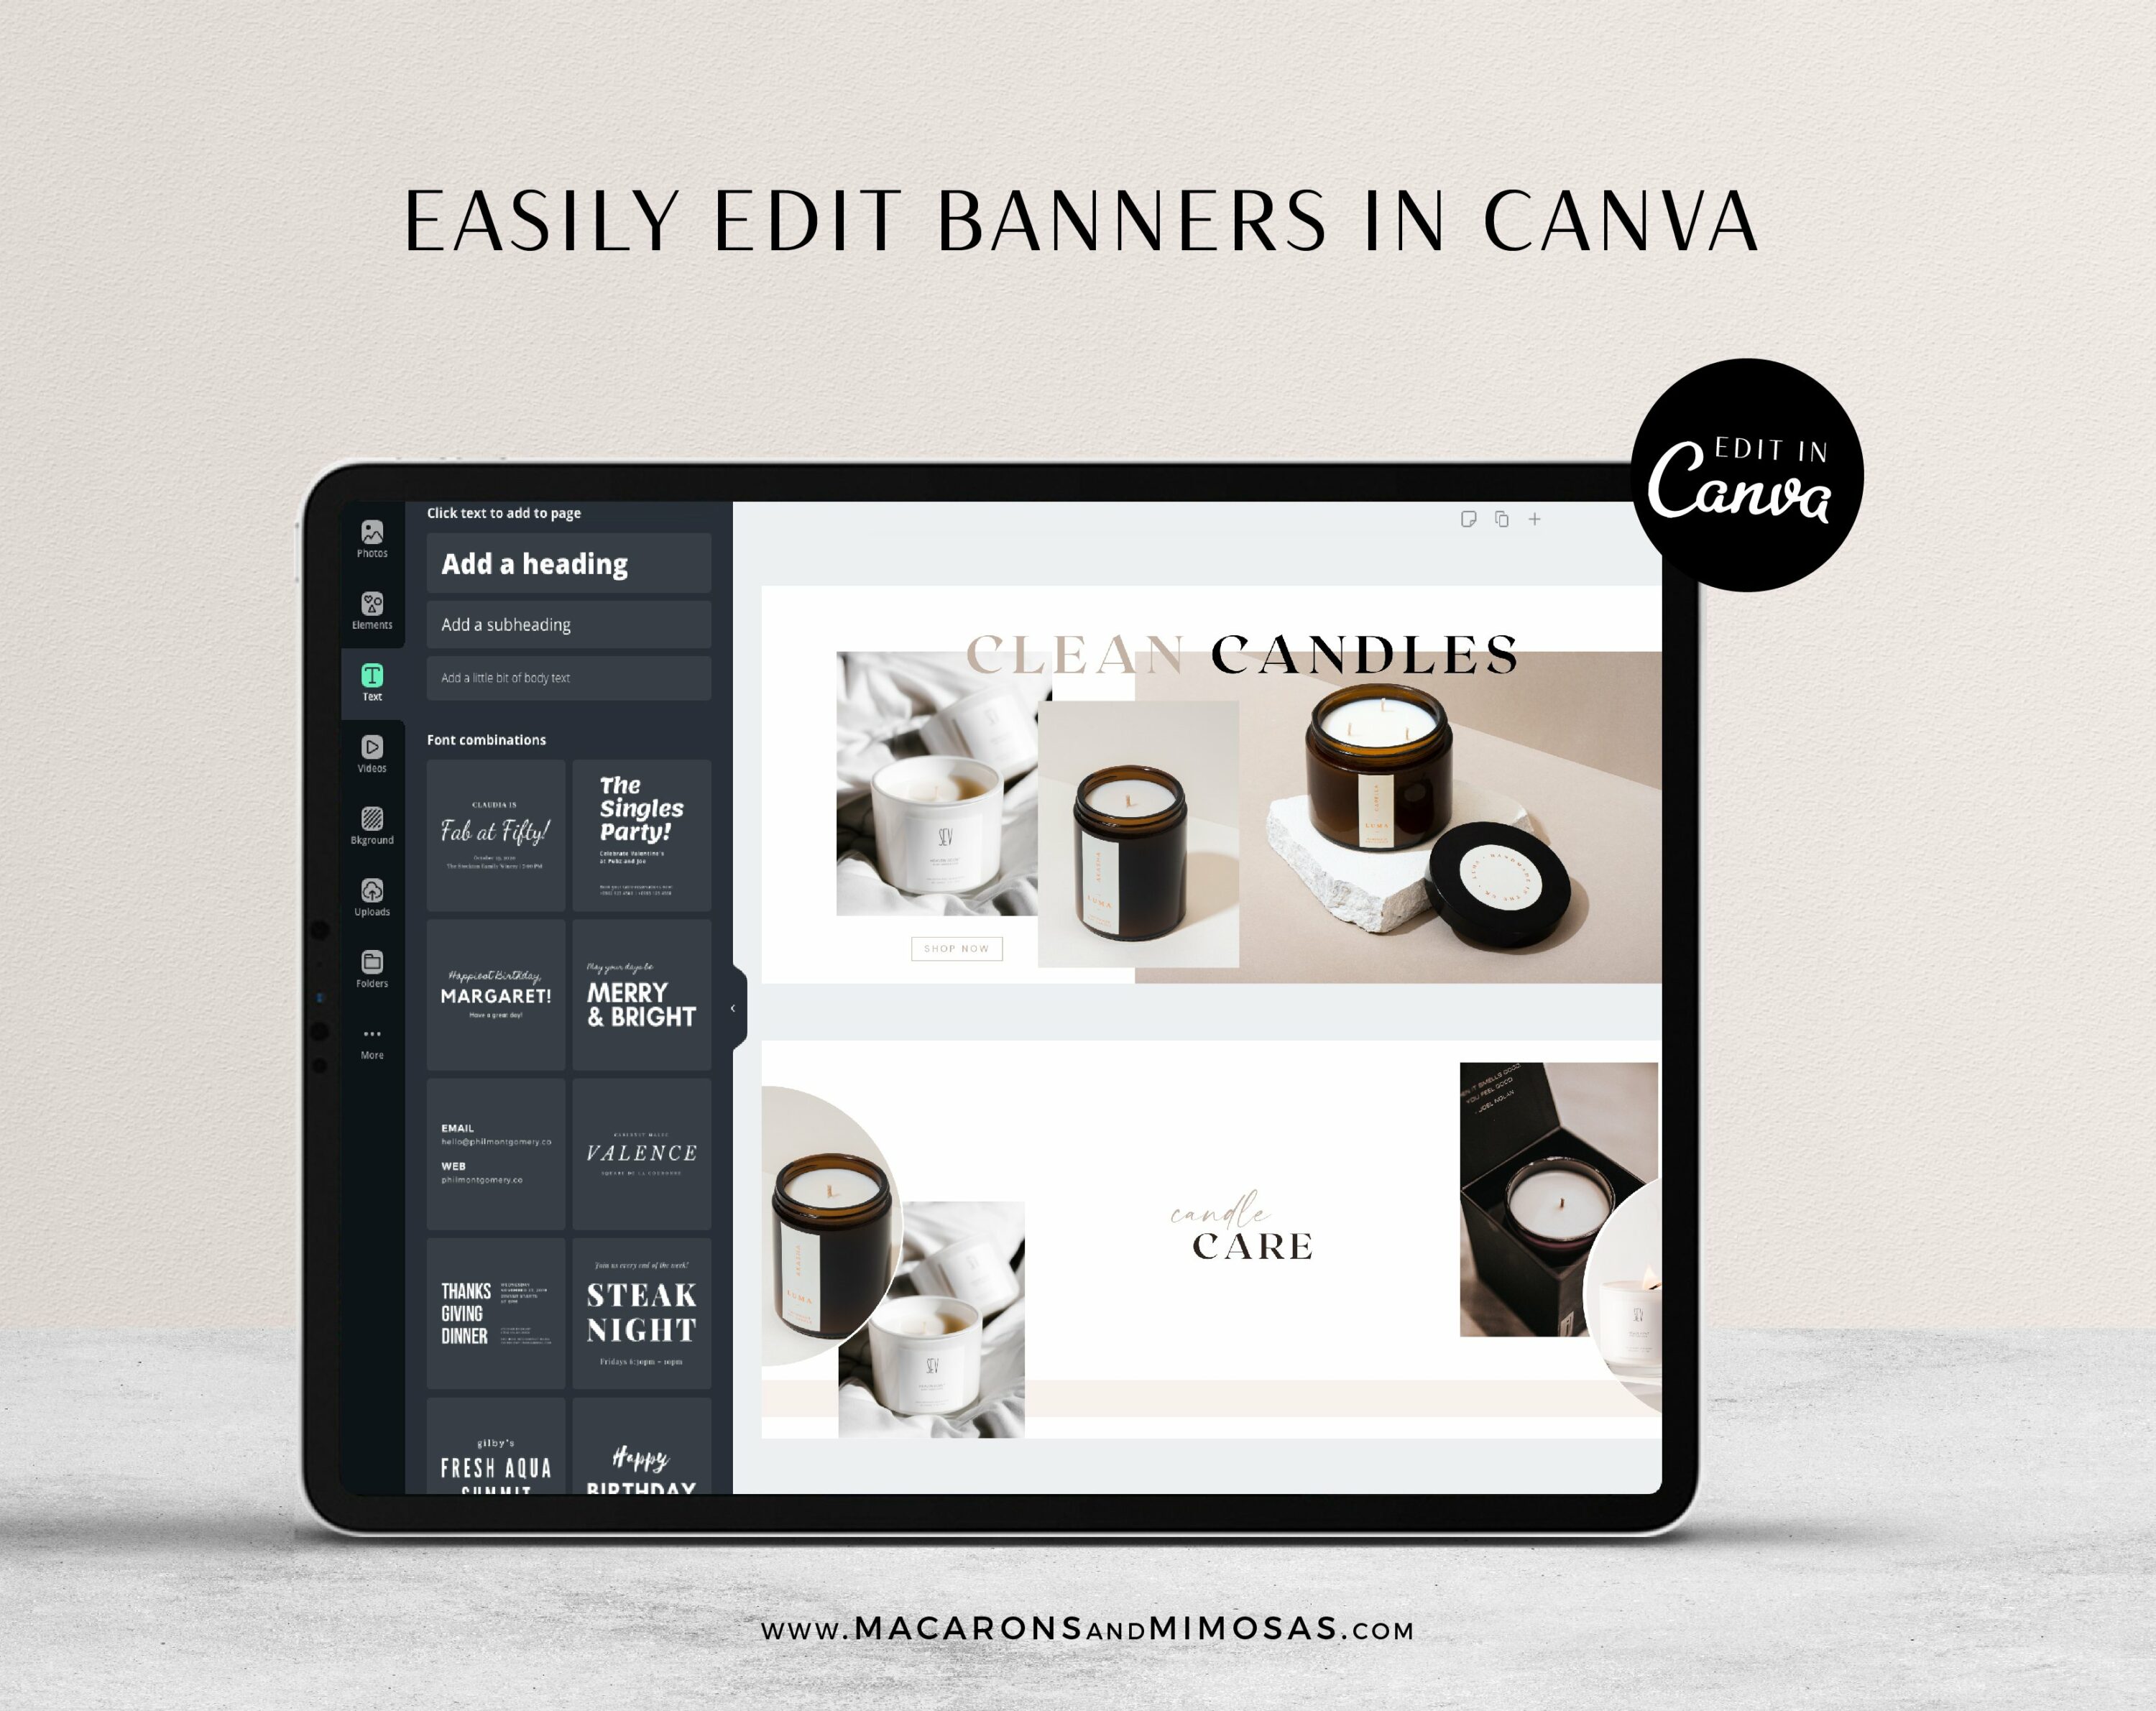 Easily edit banners in Canva.